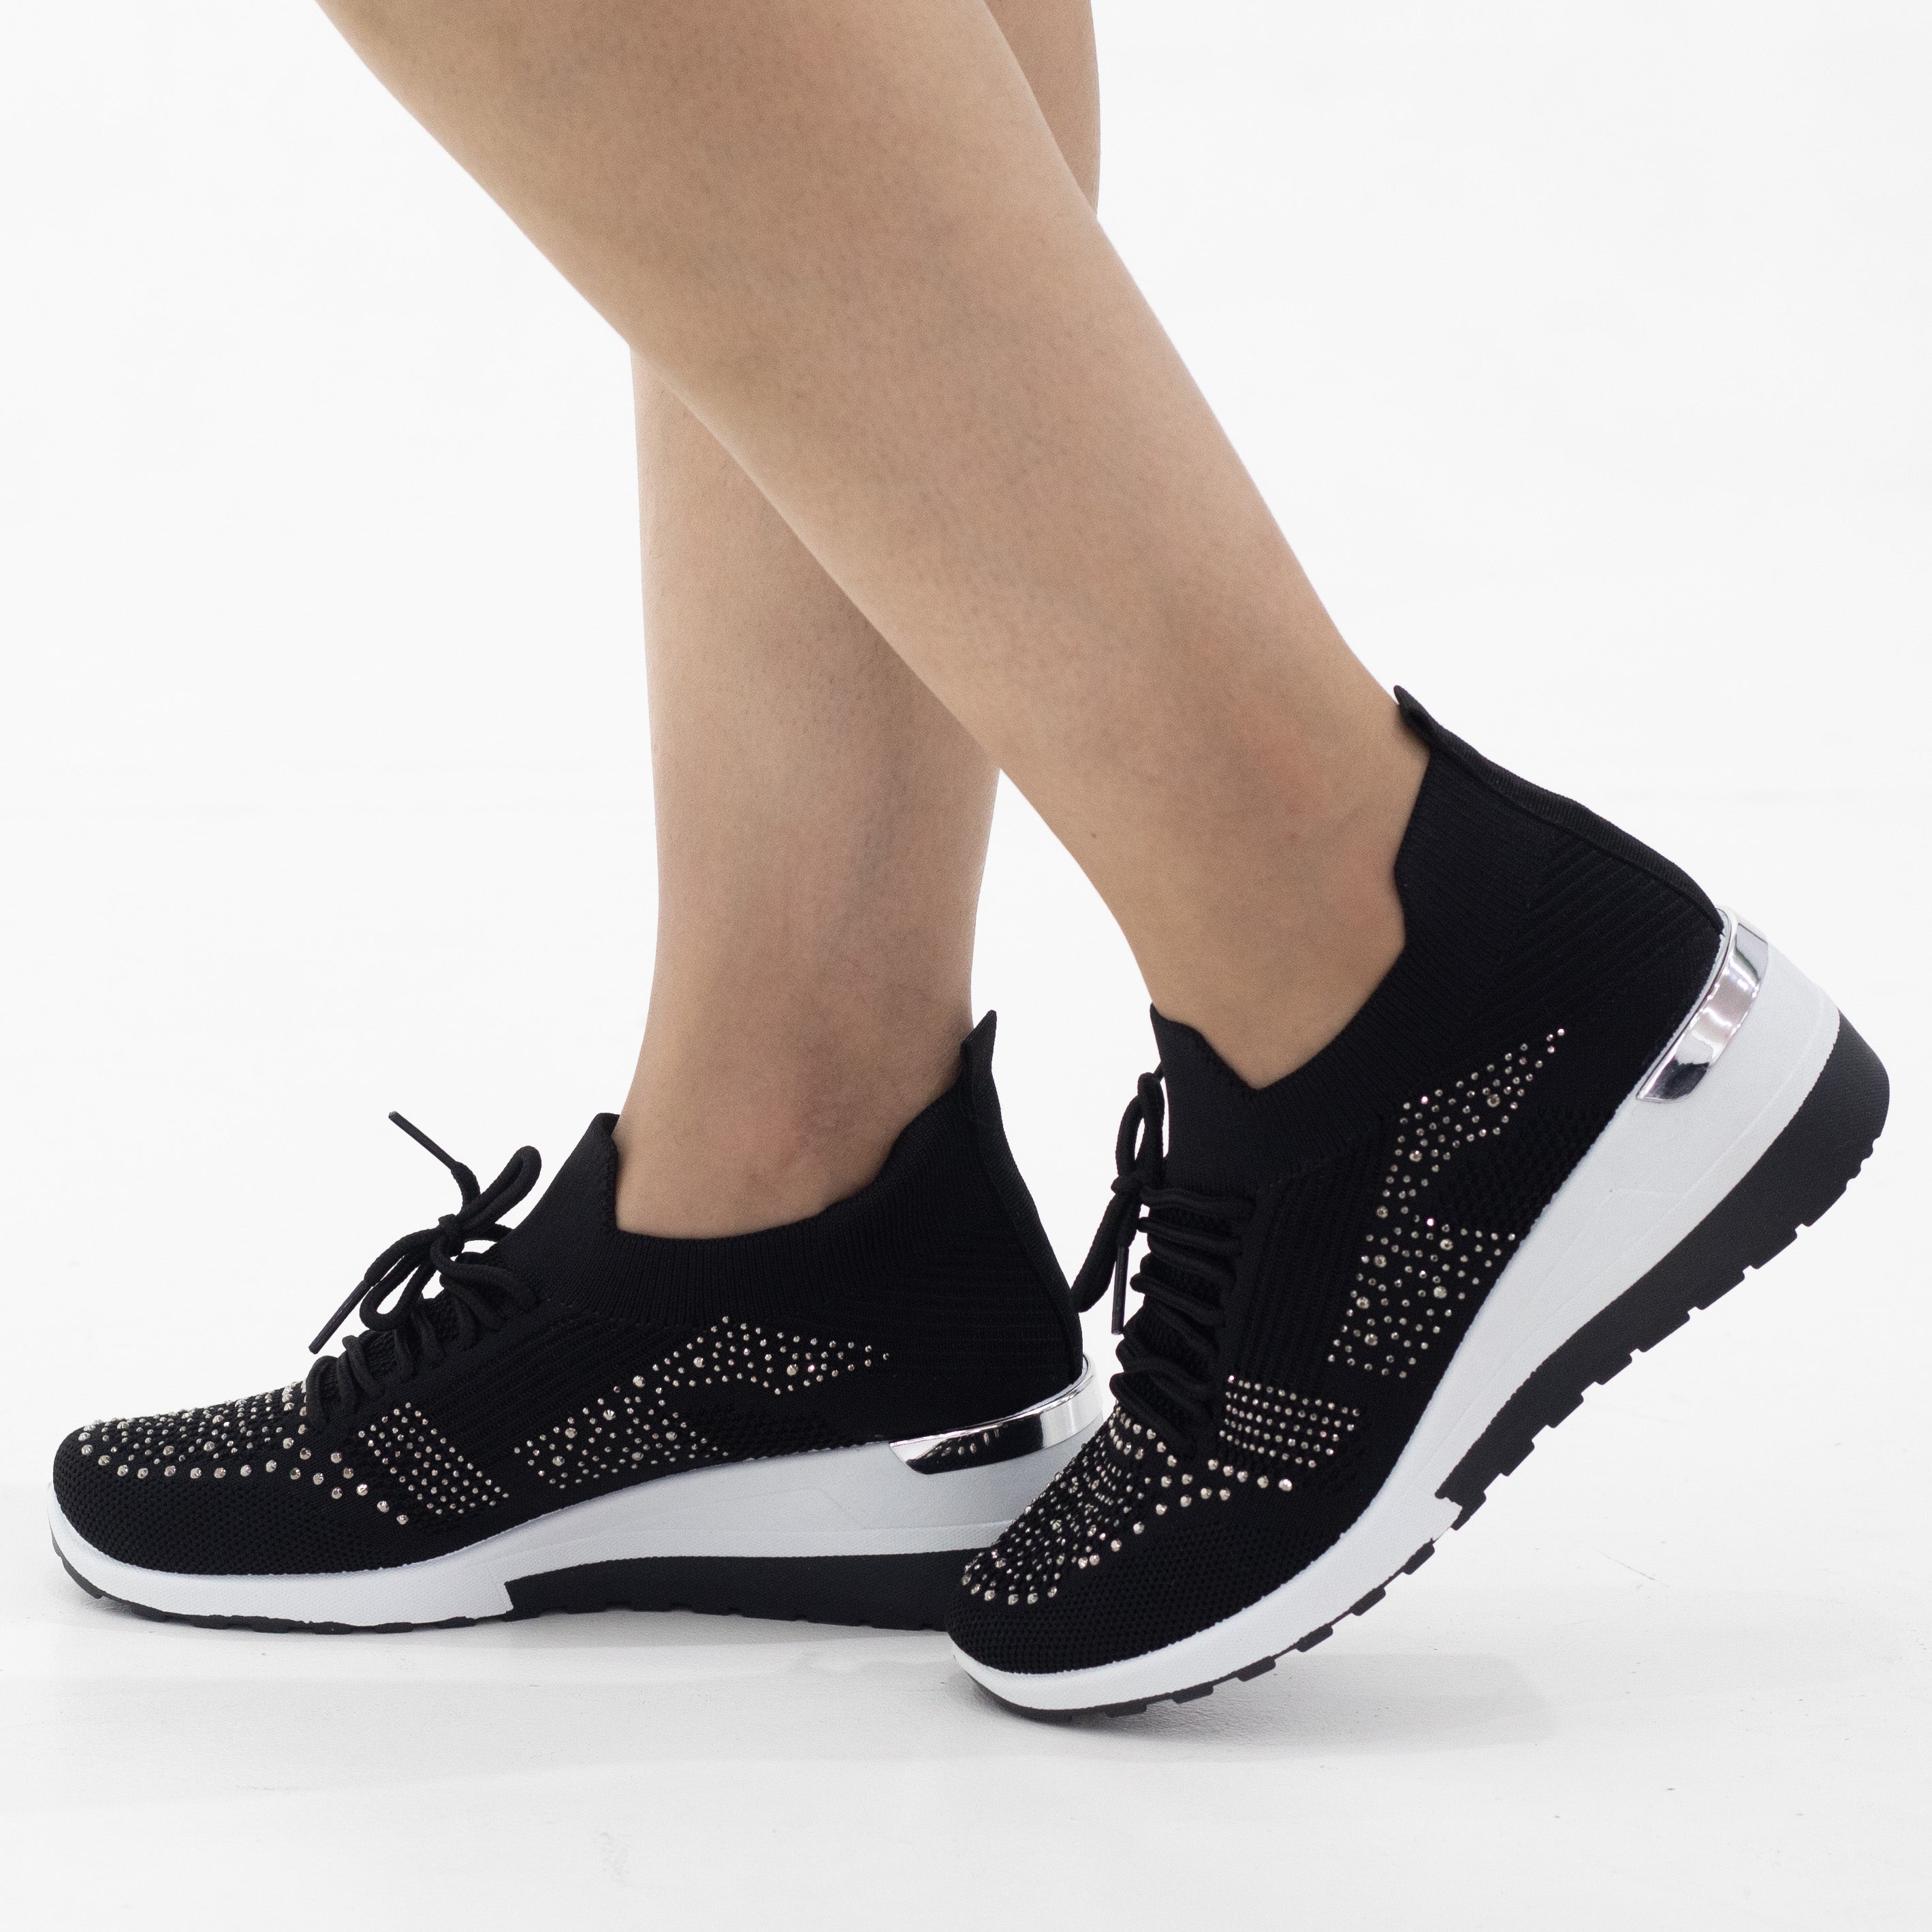 Black fly knit lace up sneaker with diamonds obioma